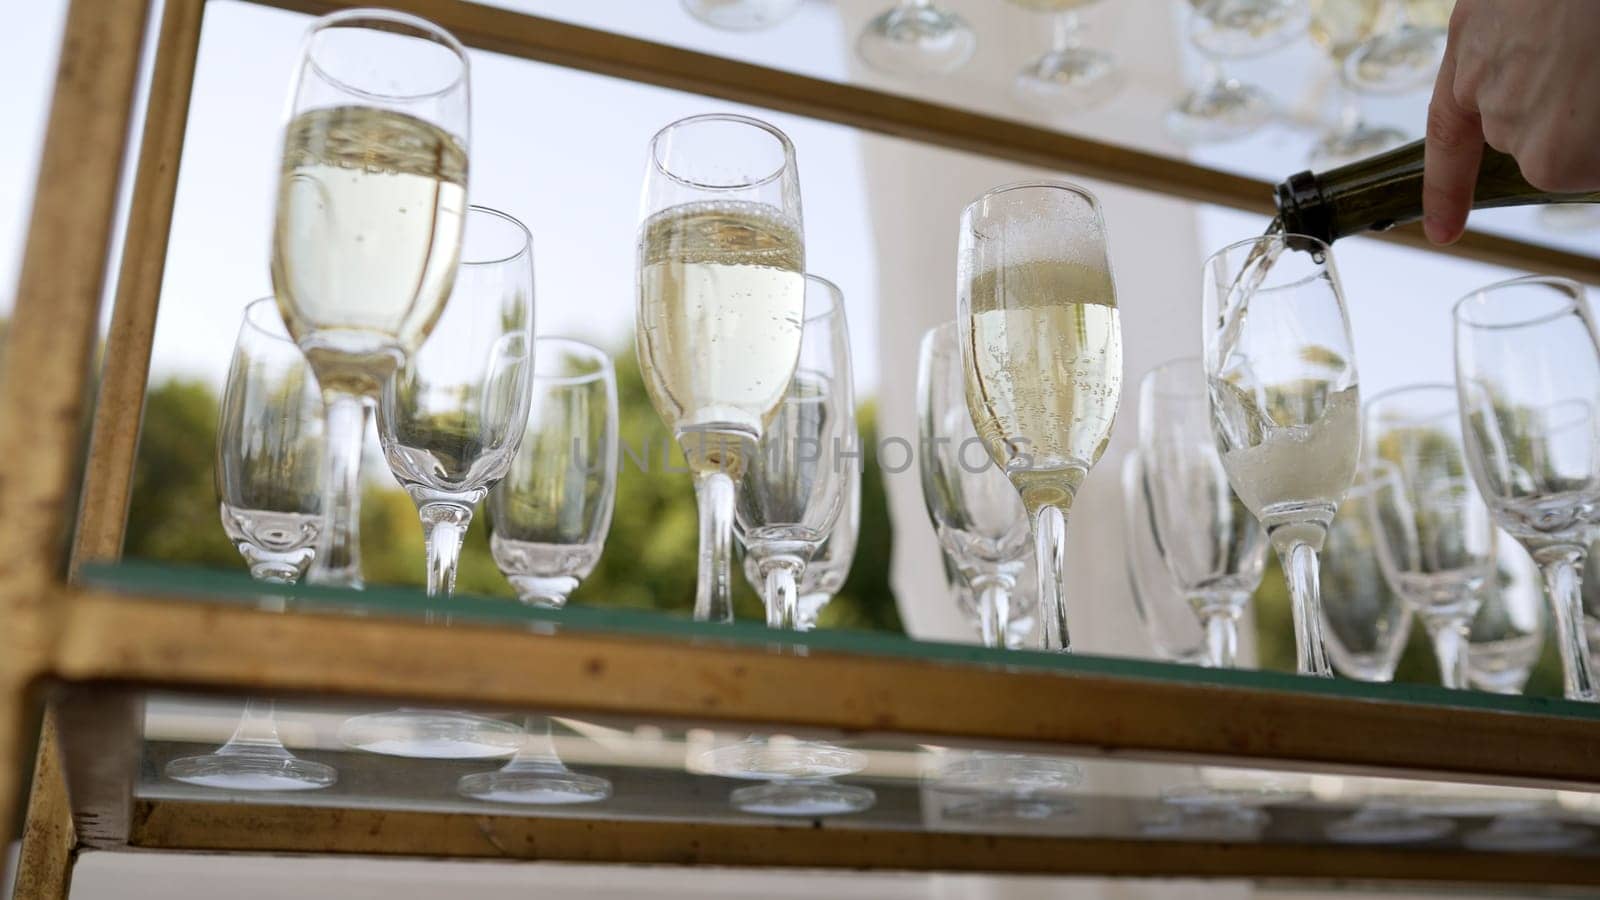 Open catering, champagne is poured into a glass, close-up. The waiter pours champagne into a glass. A bottle of sparkling champagne and glasses are poured into a glass at an outdoor wedding event.